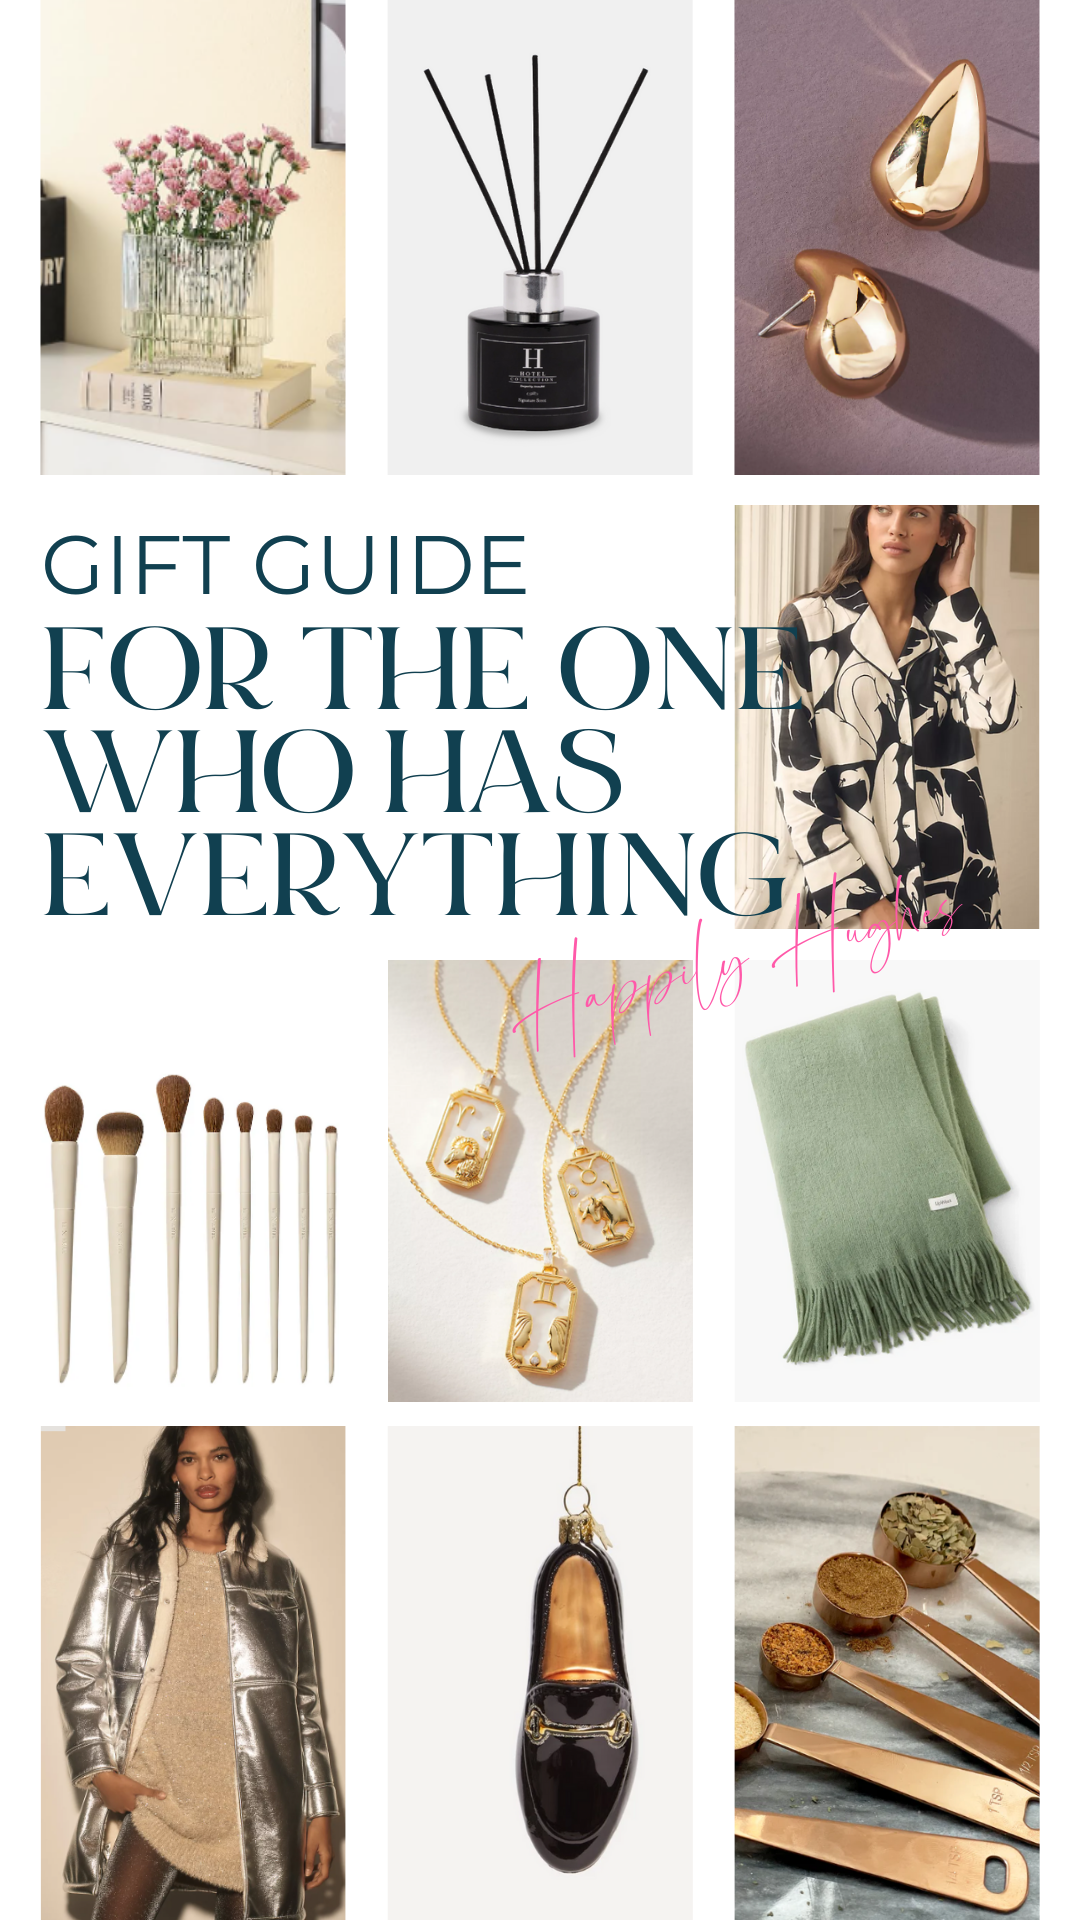 Guide Guide Items for The One Who Has Everything